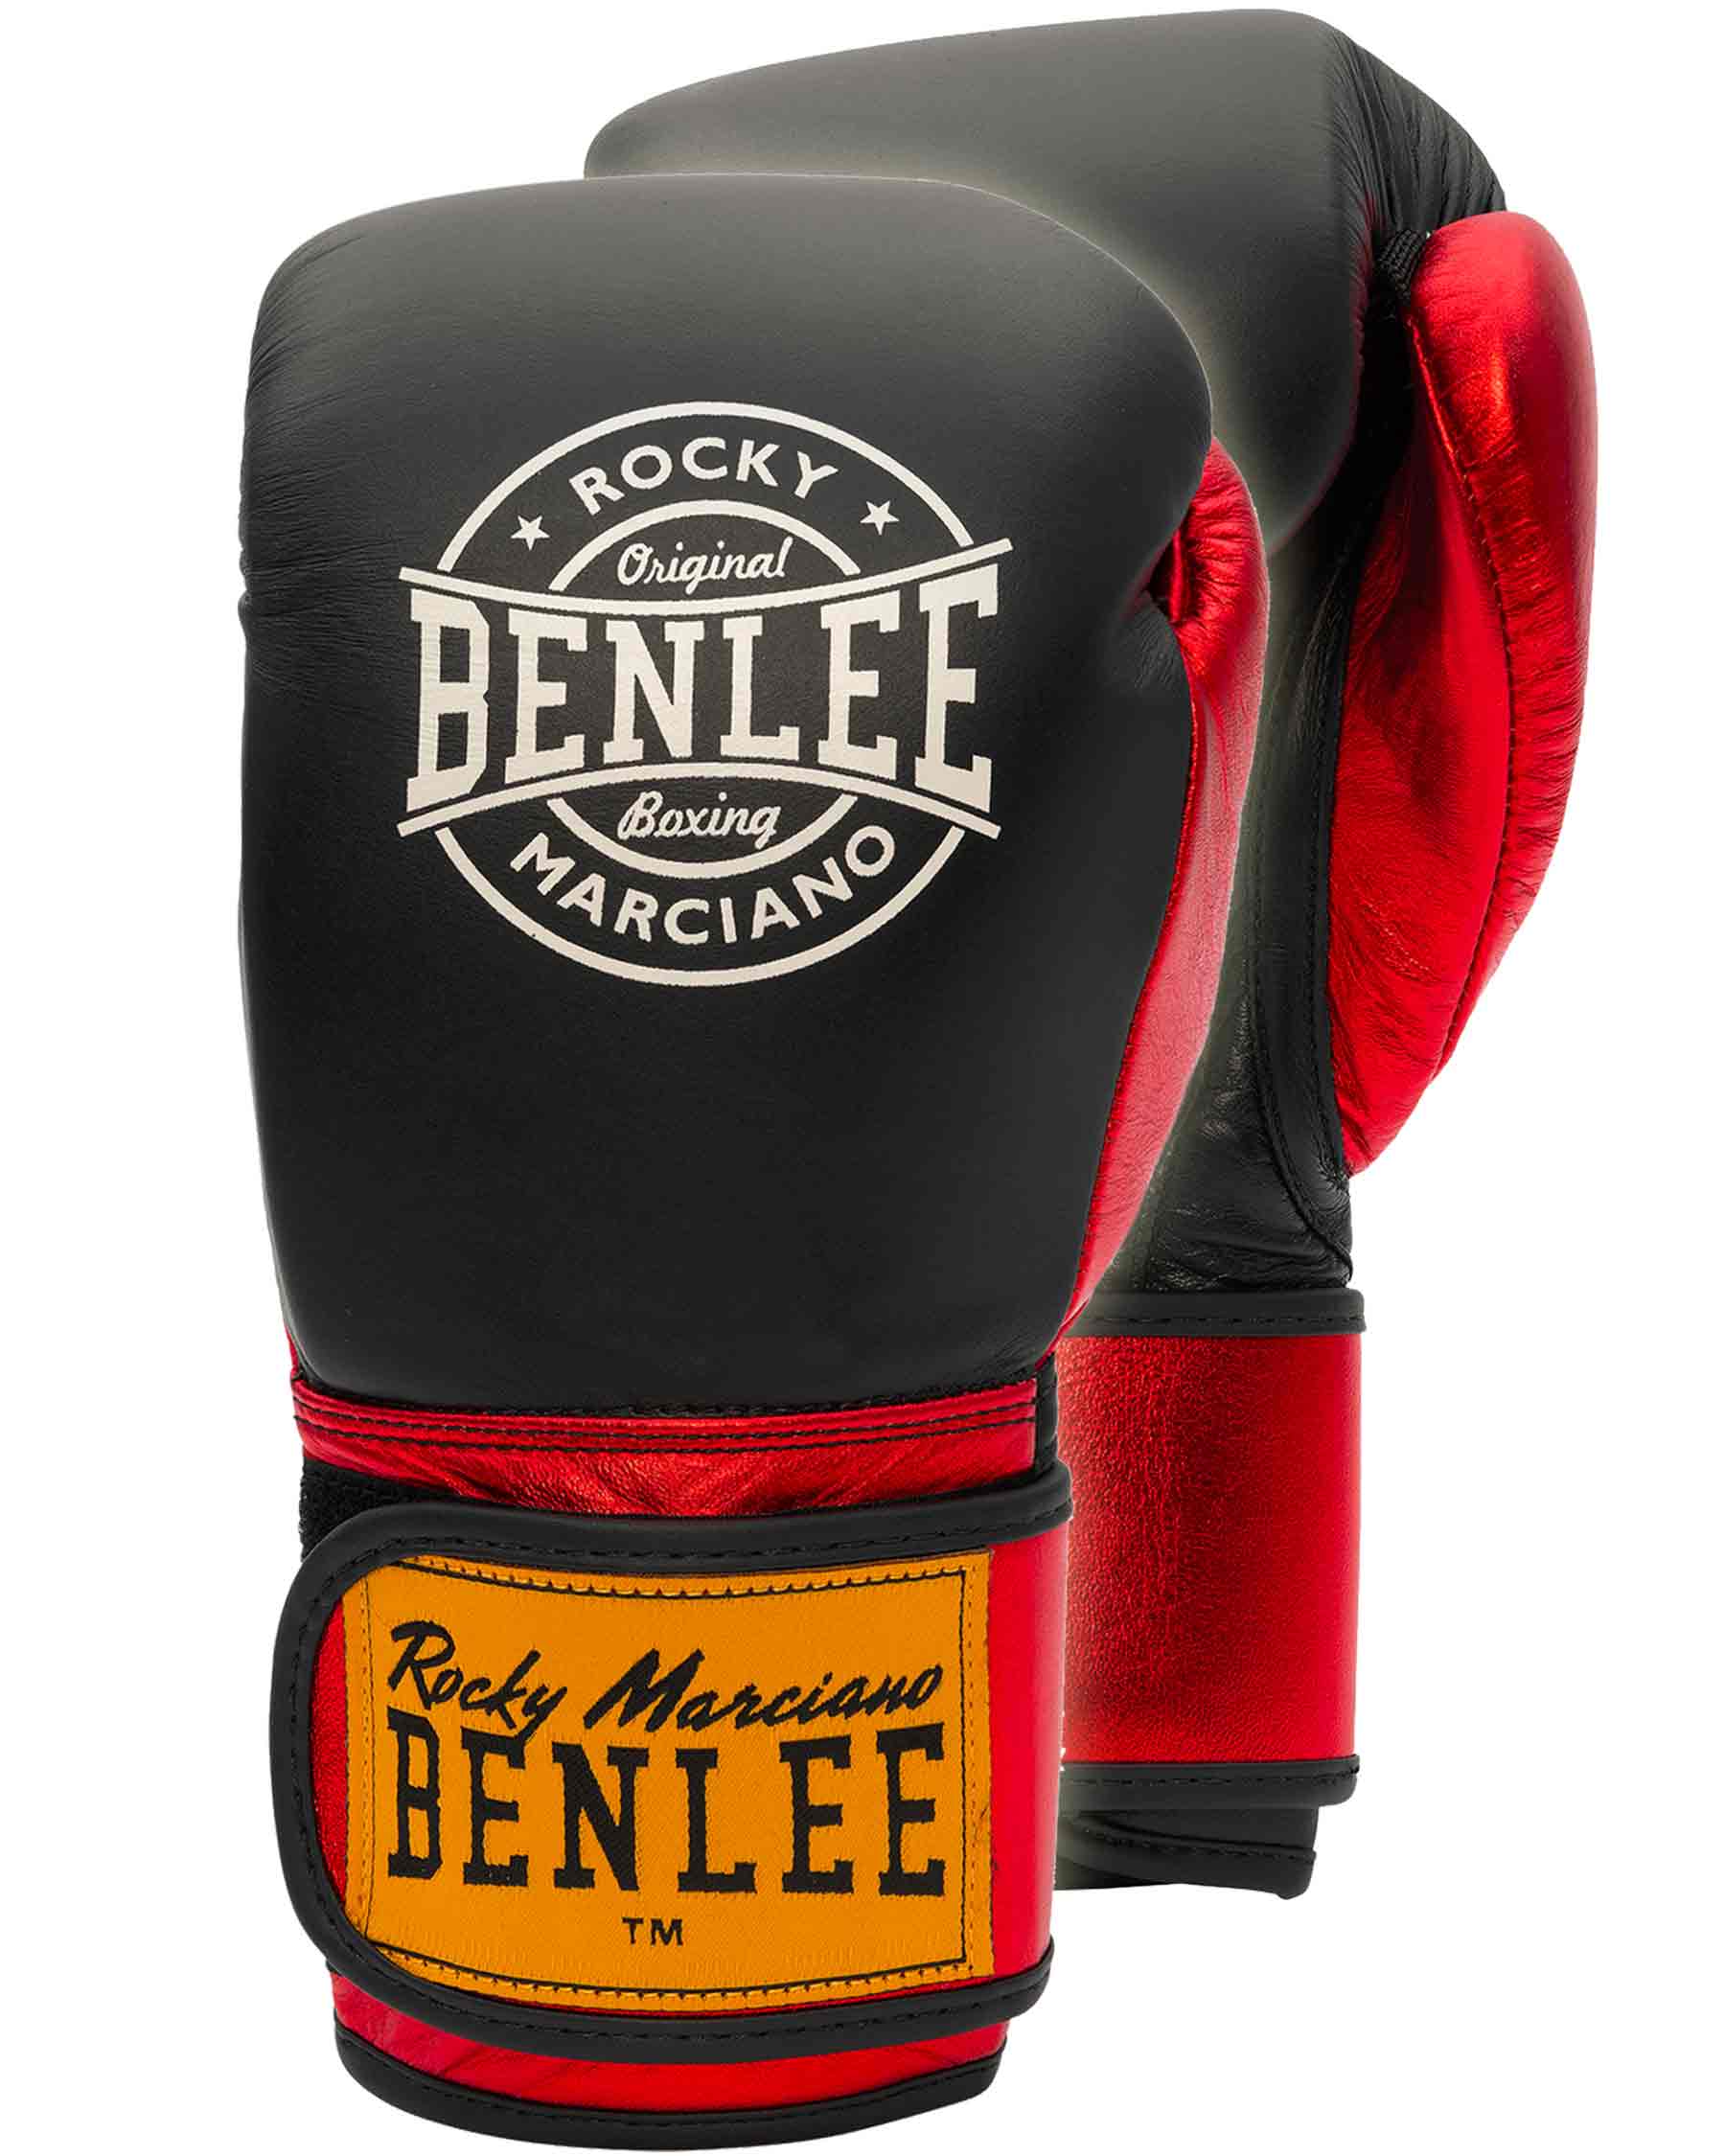 BenLee leather boxing gloves Metalshire - Boxing gloves, training gloves  and sparring gloves - BenLee boxing equipment and sportswear